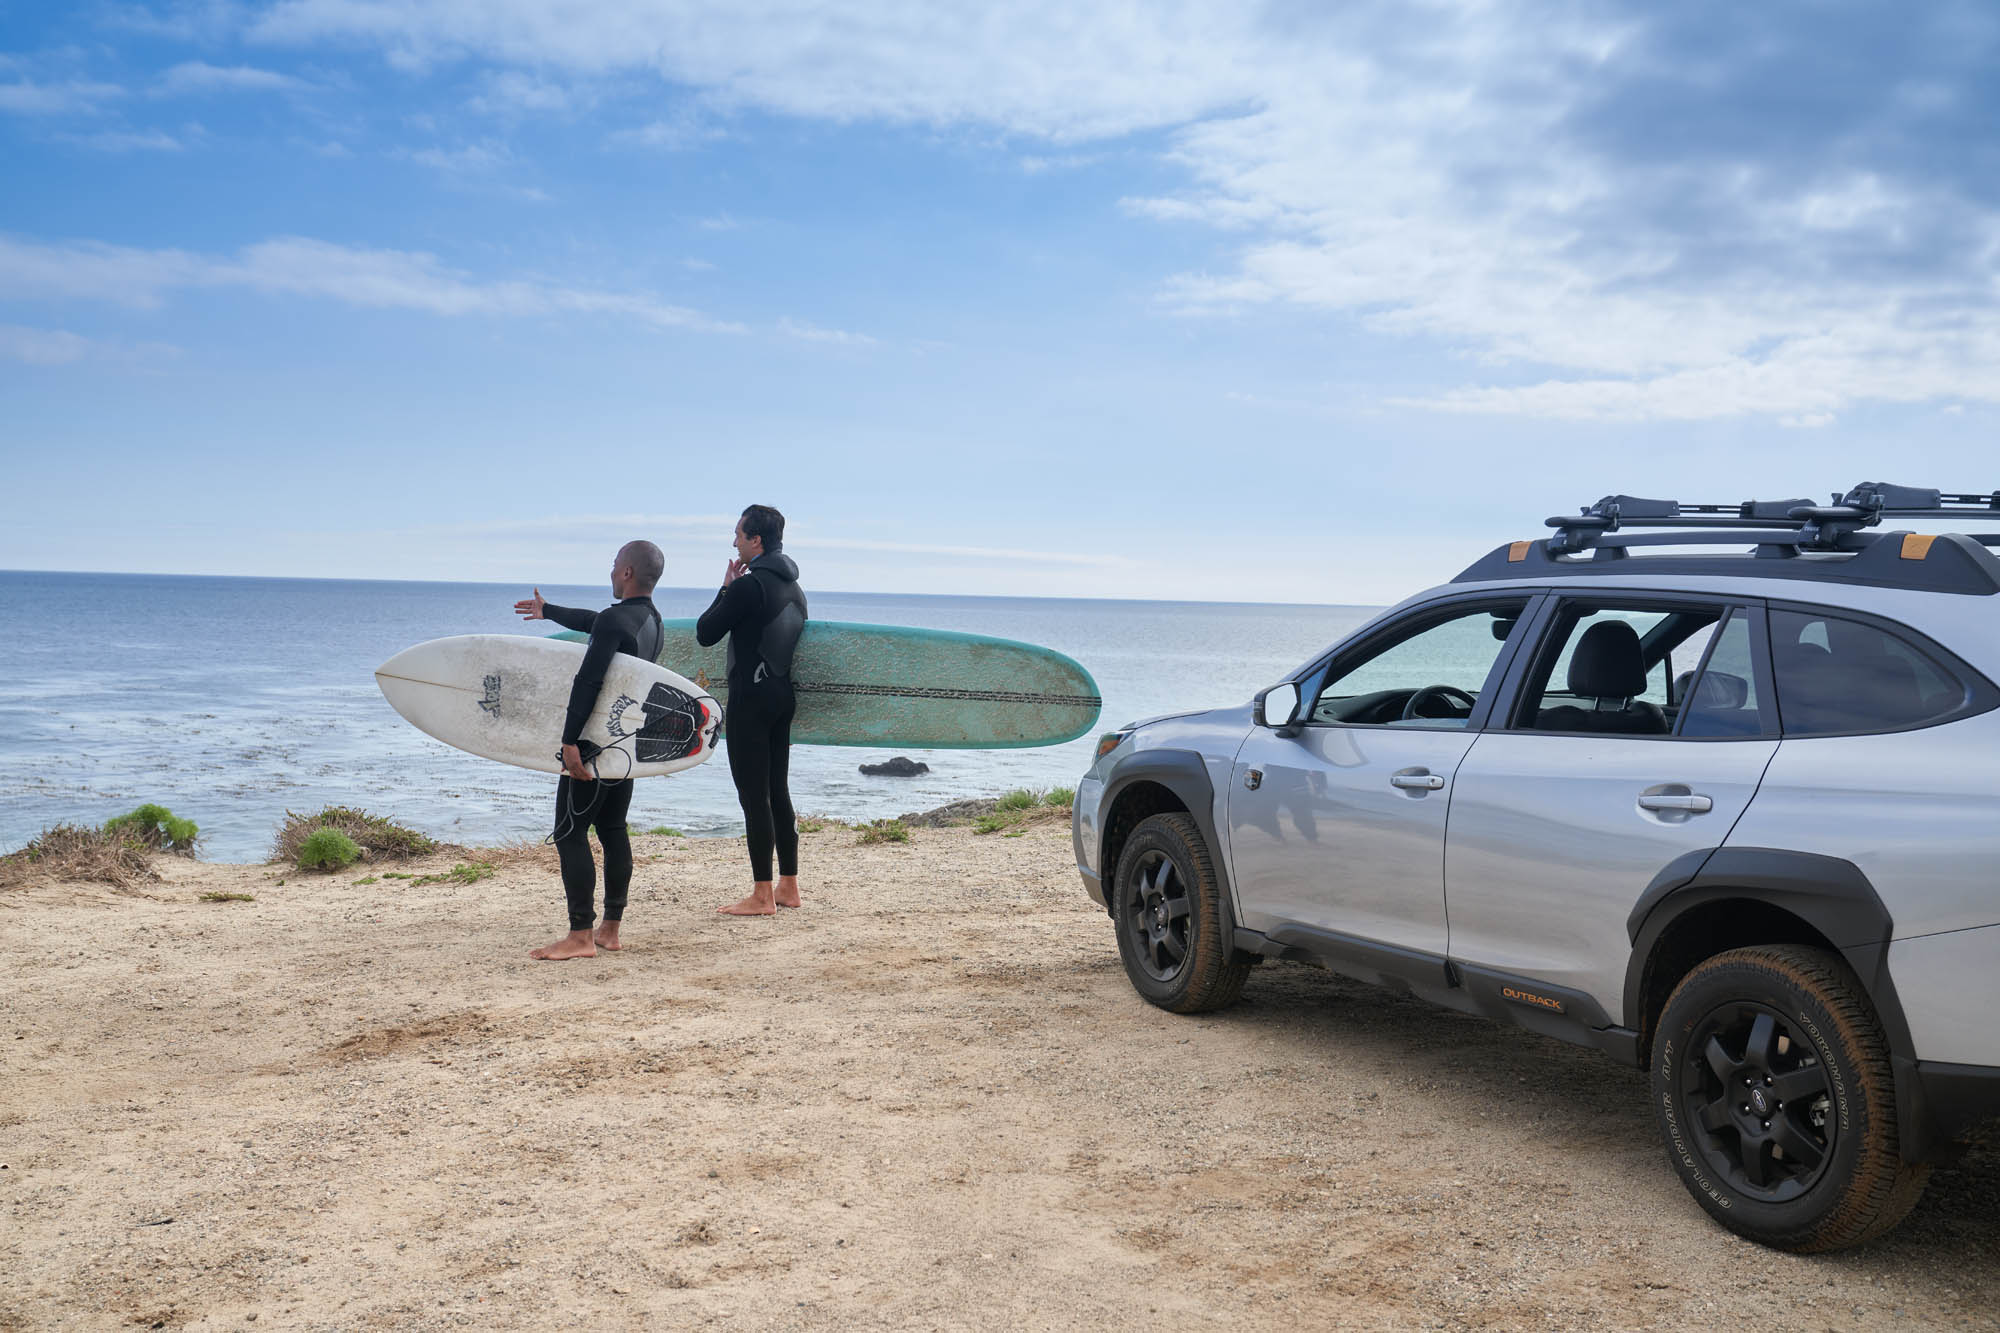 Surfers and Subaru Outback at Beach